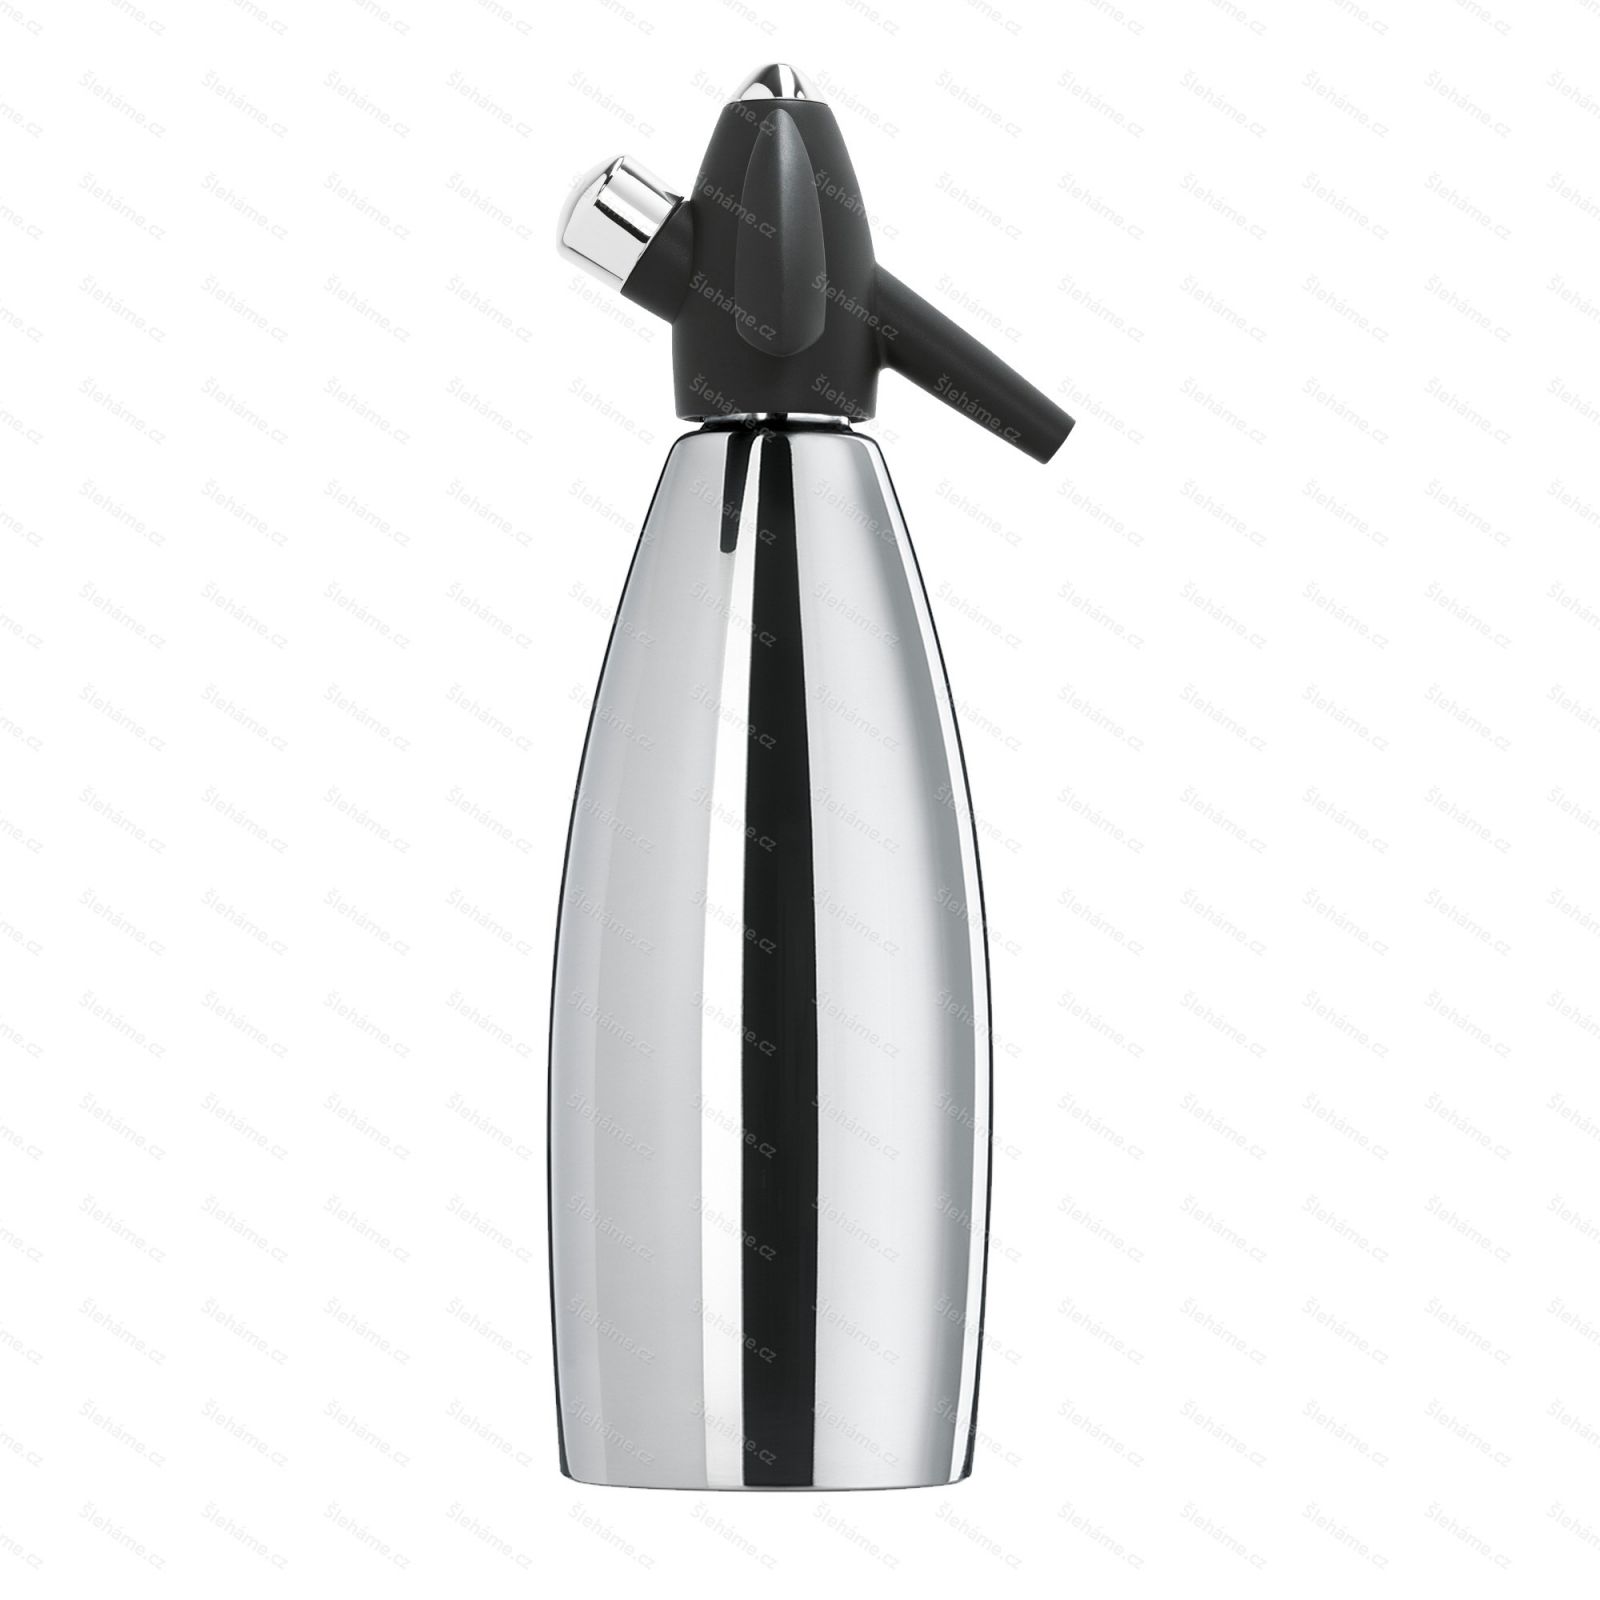 iSi SODA SIPHON INOX 1.0 l, stainless steel - main view